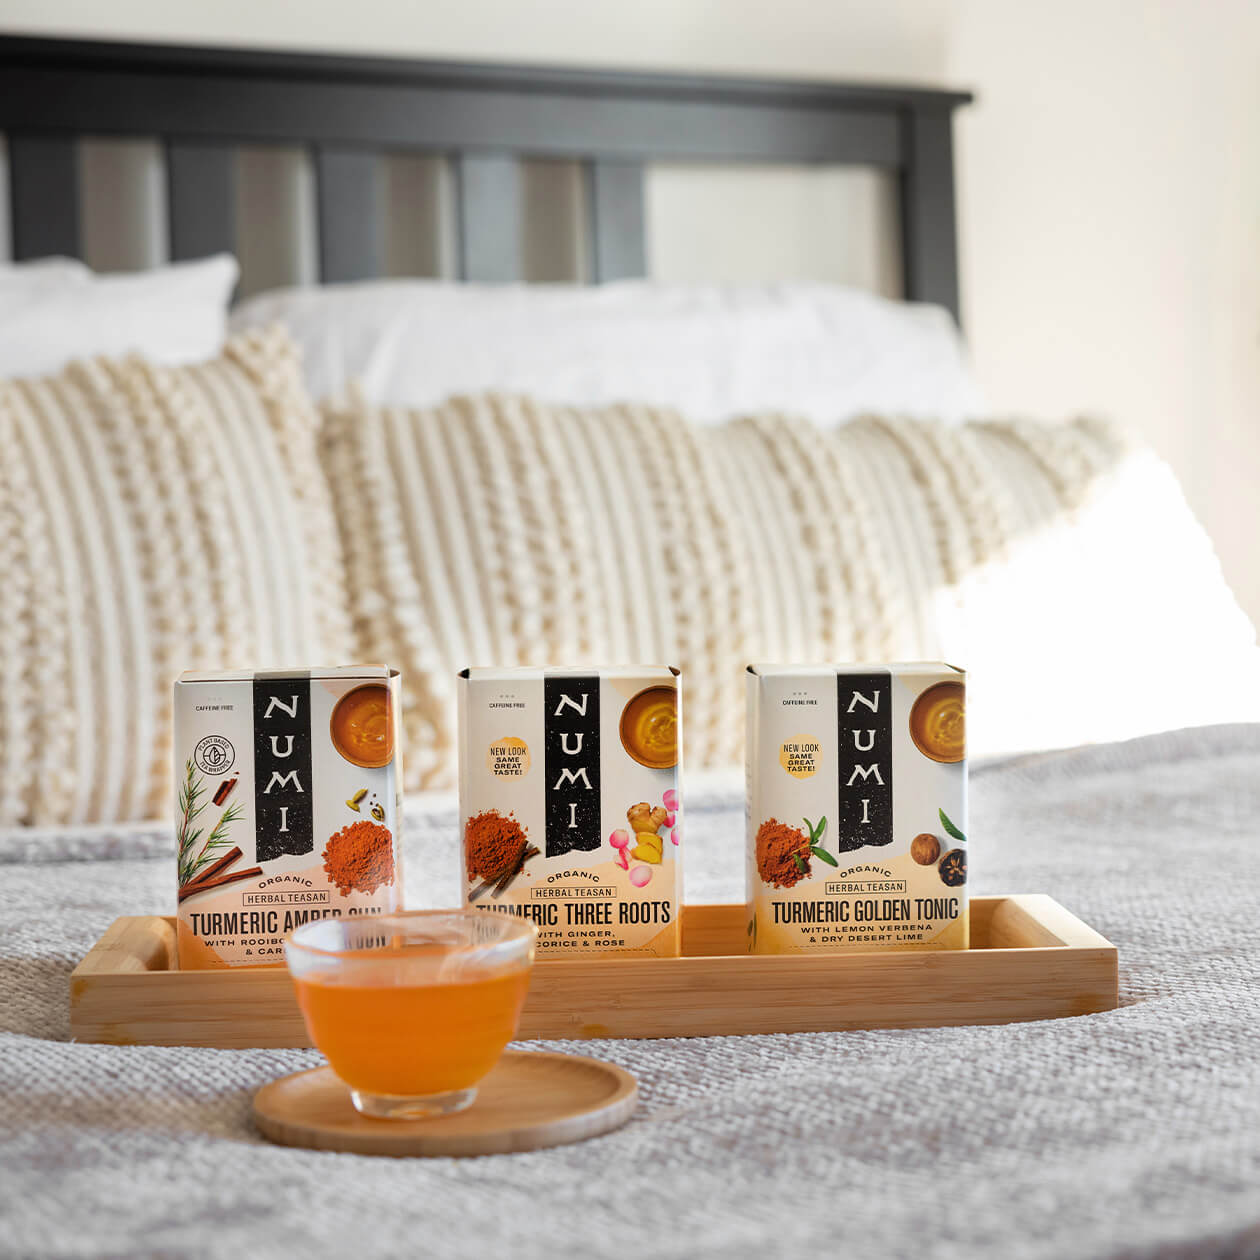 Numi's turmeric teas on a tray on a bed in the morning, including Turmeric Amber Sun, Three Roots, and Golden Tonic